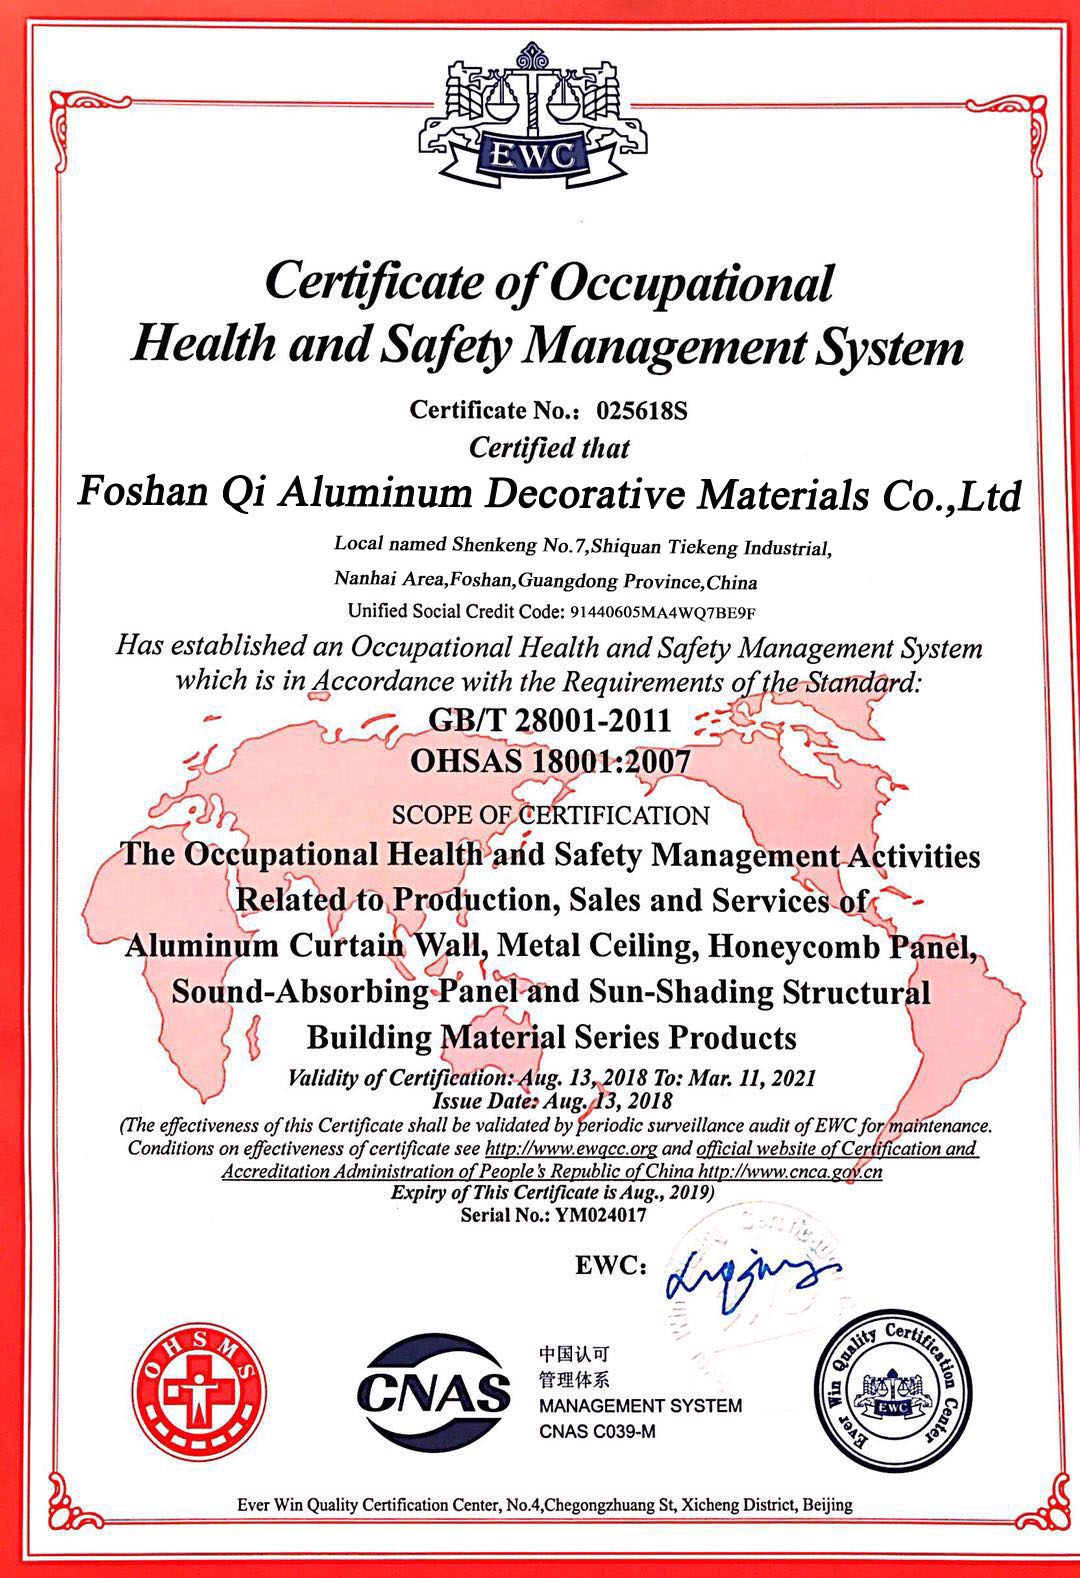 Certificate of Occupational Health and Safety Management System